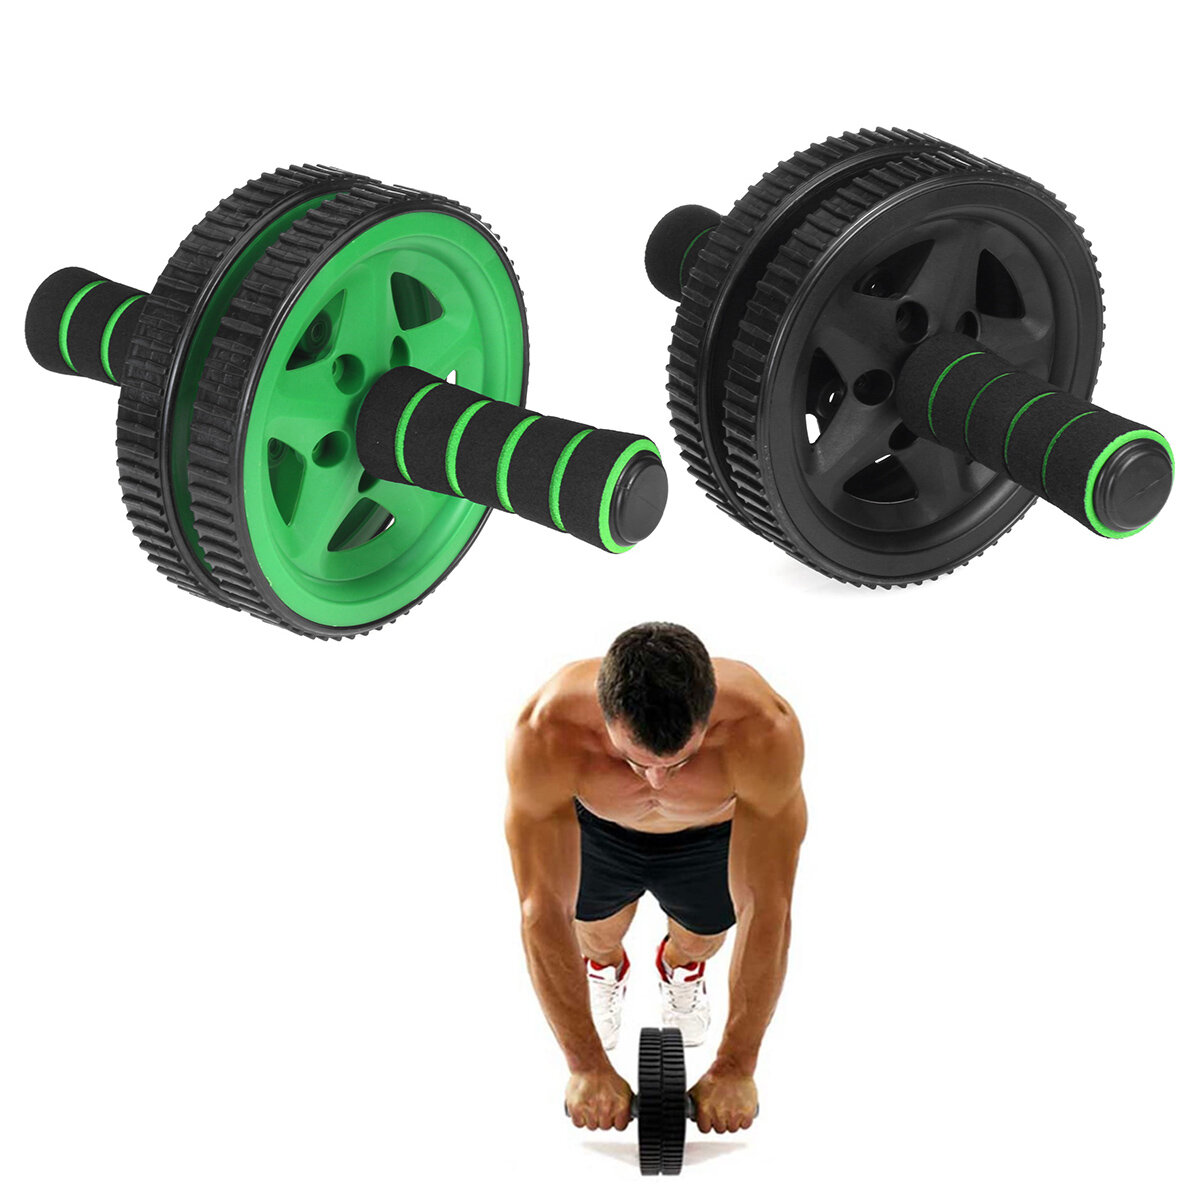 Two-wheel Sponge Sleeve Abdominal Wheel Roller w/ Knee Pad Home Muscle Training Abs Fitness Trainer